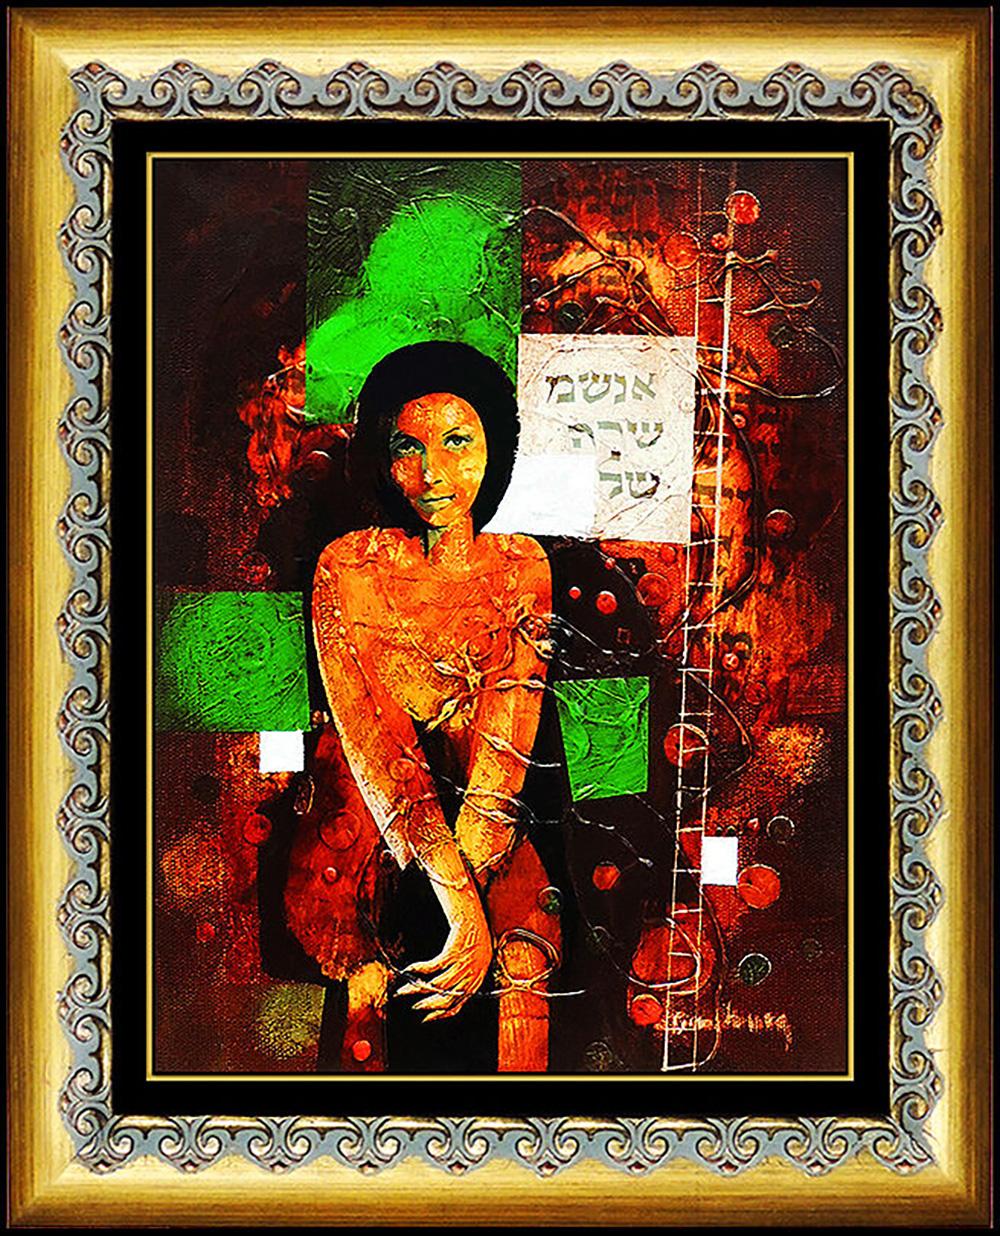 Yankel Ginzburg Abstract Painting - YANKEL GINZBURG Original PAINTING Oil On CANVAS Authentic Signed Nude Portrait